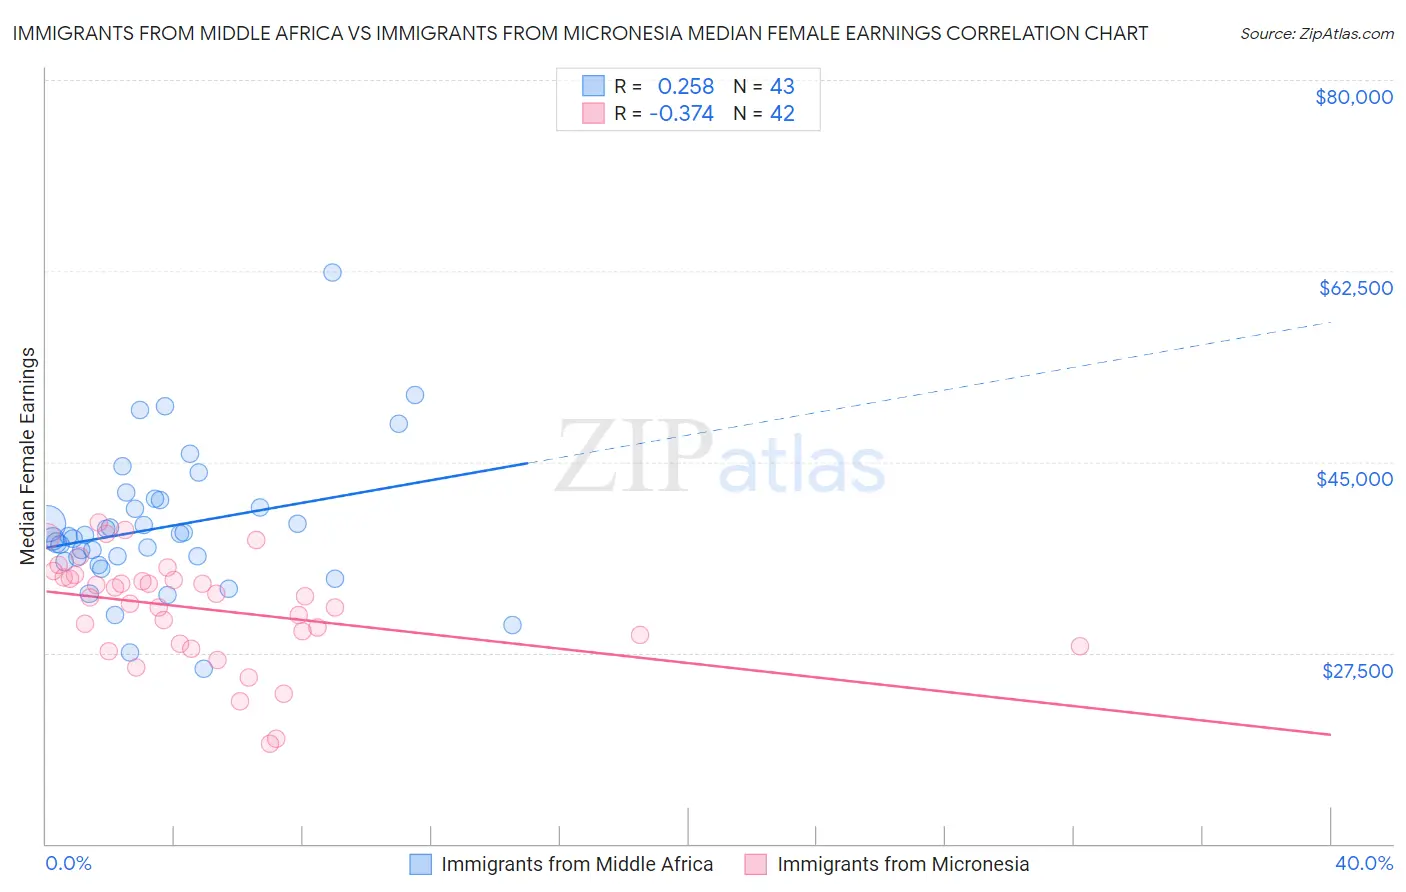 Immigrants from Middle Africa vs Immigrants from Micronesia Median Female Earnings